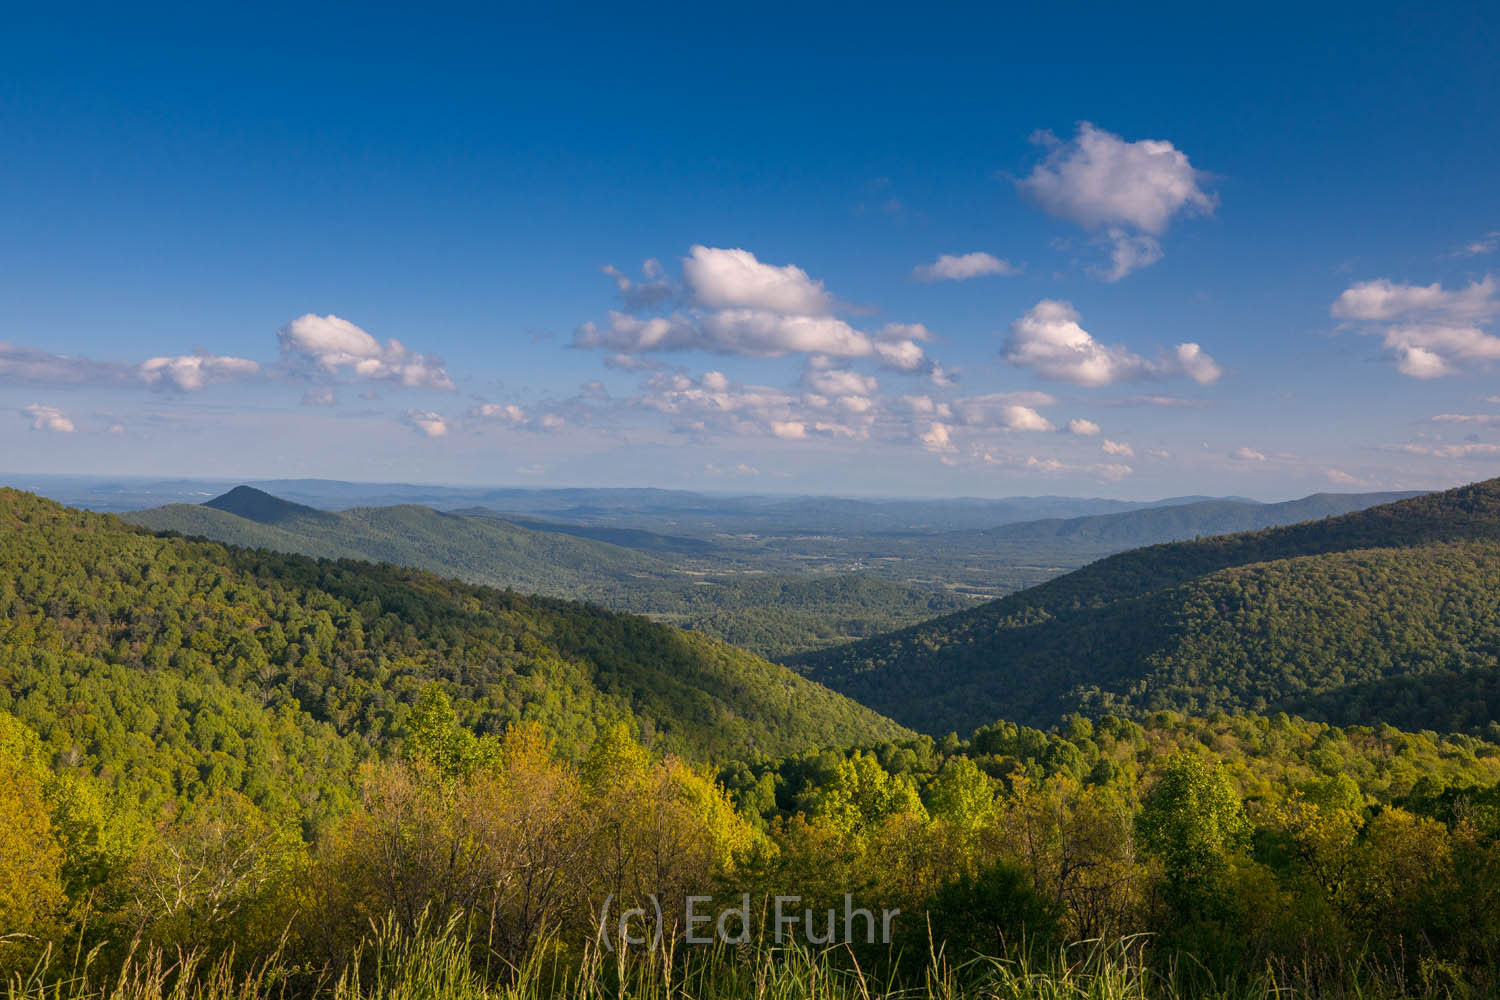 One of the great eastern overlooks in the southern district of Shenandoah National Park.